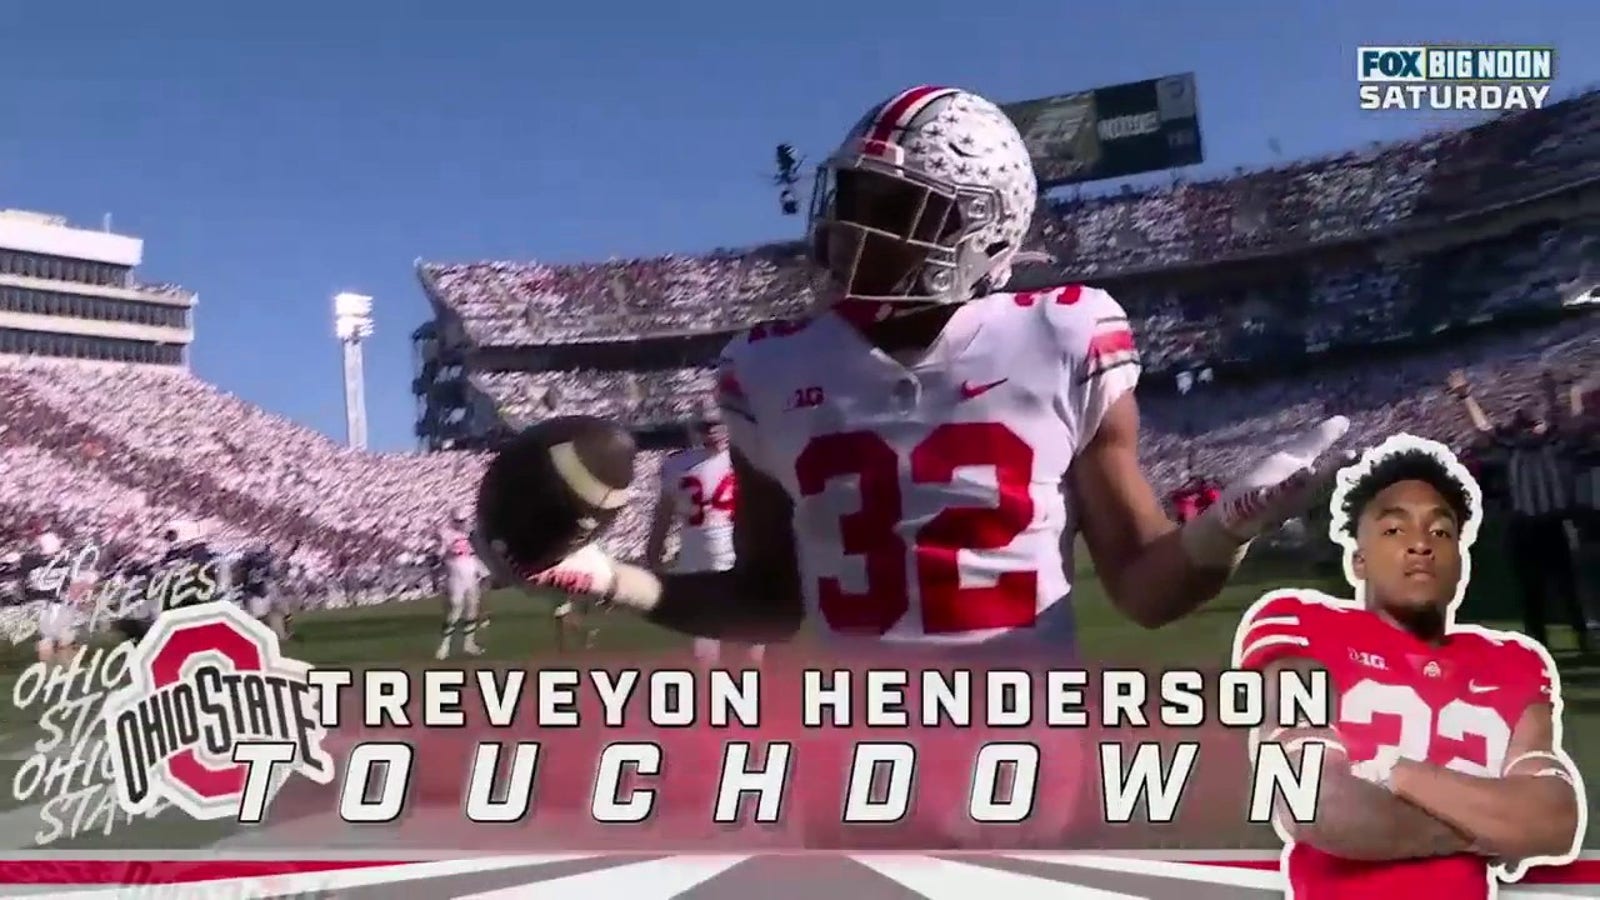 Ohio State takes a 36-24 lead on TreVeyon Henderson's seven-yard rushing TD